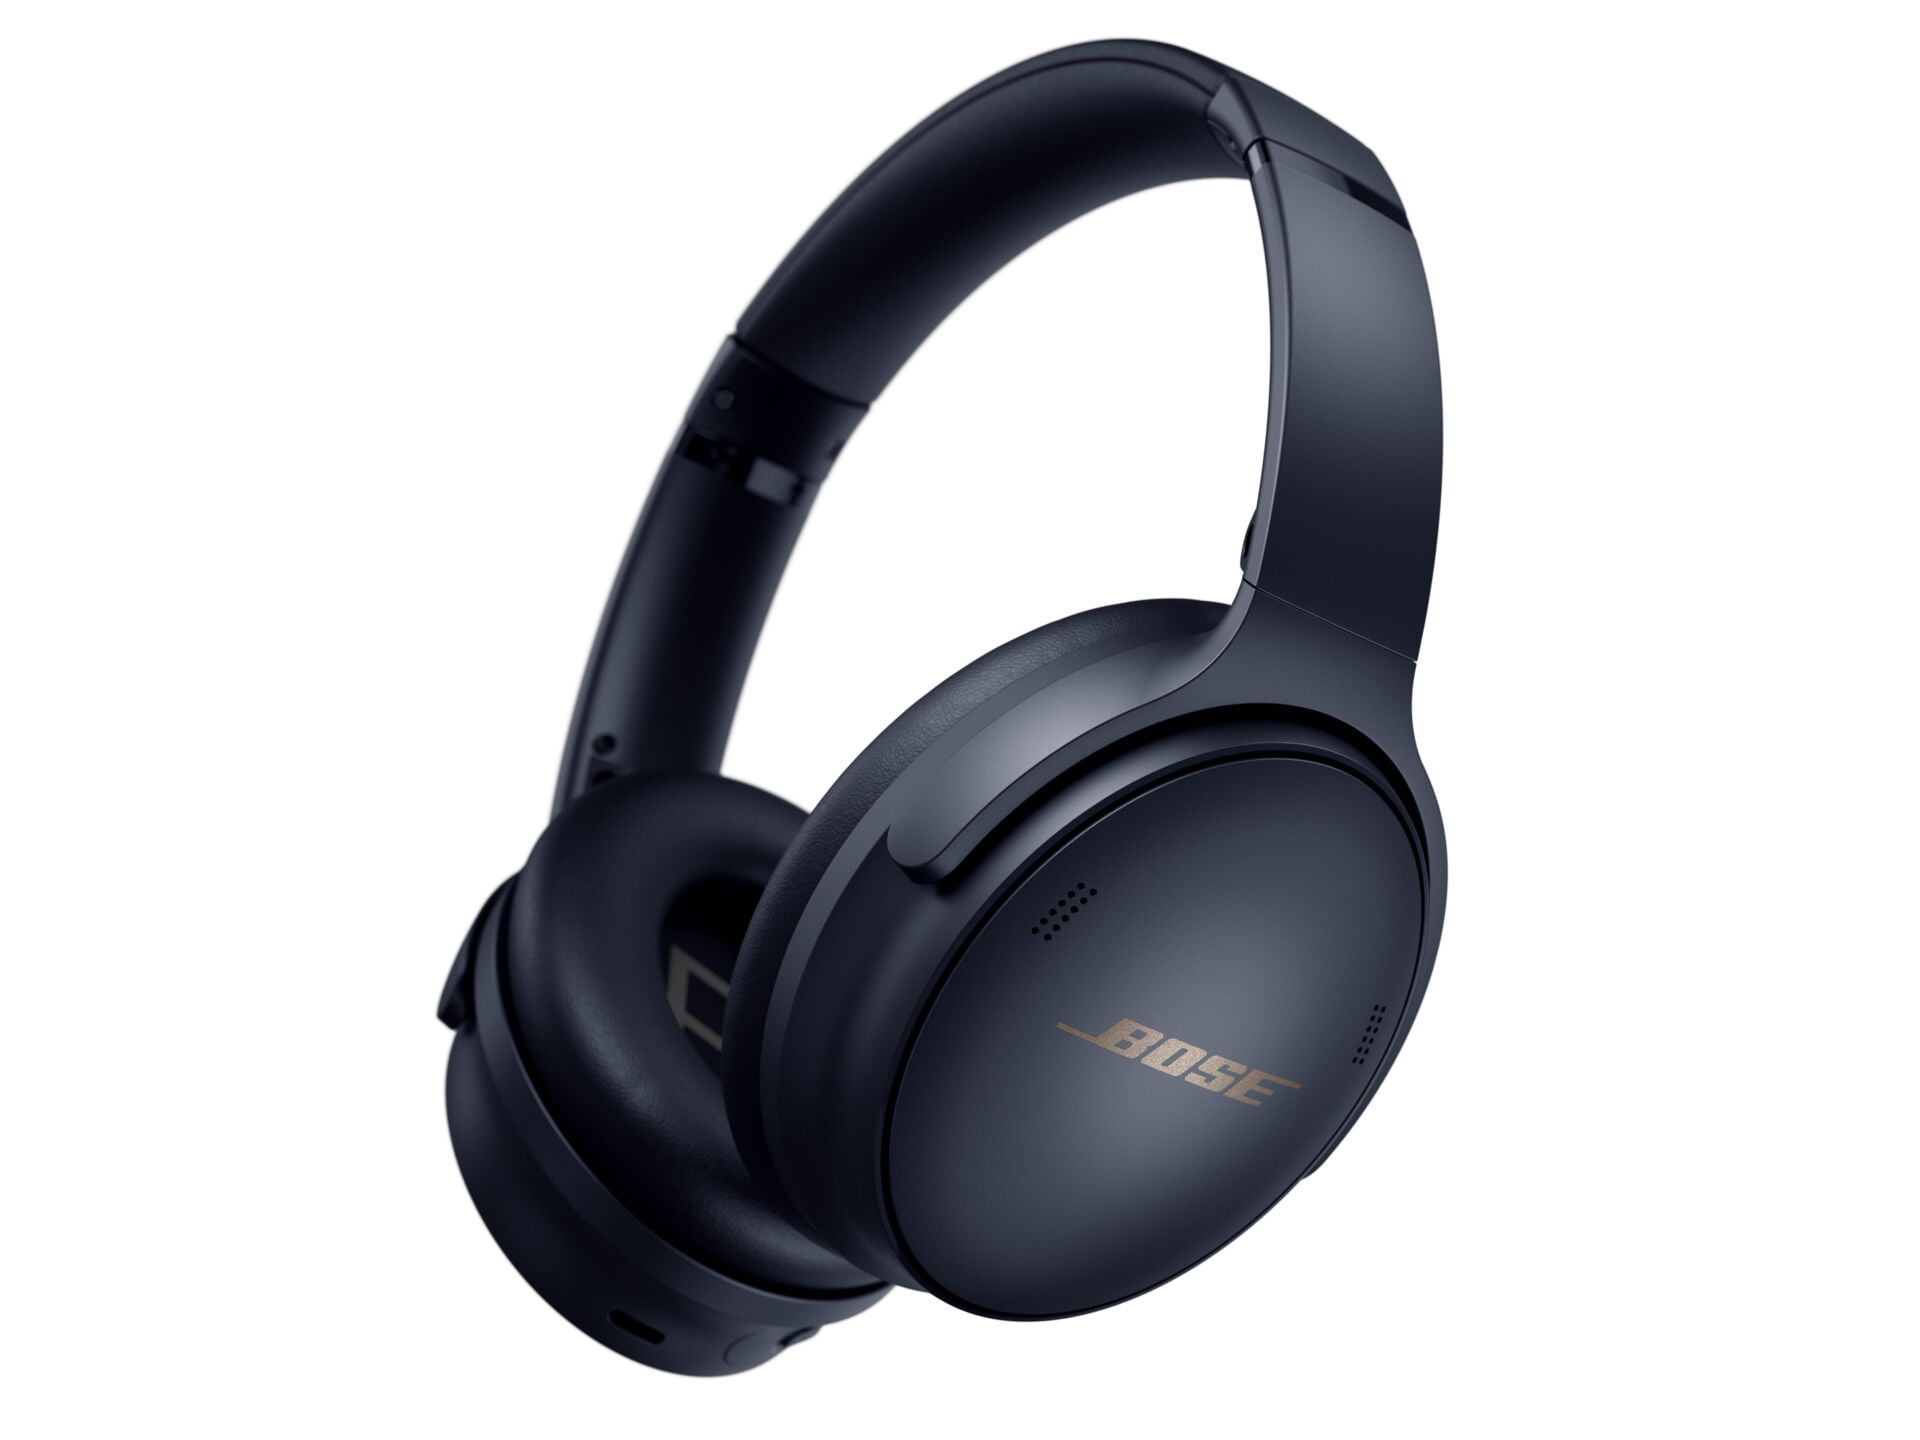 Bose QuietComfort 45 deal matched by Walmart!